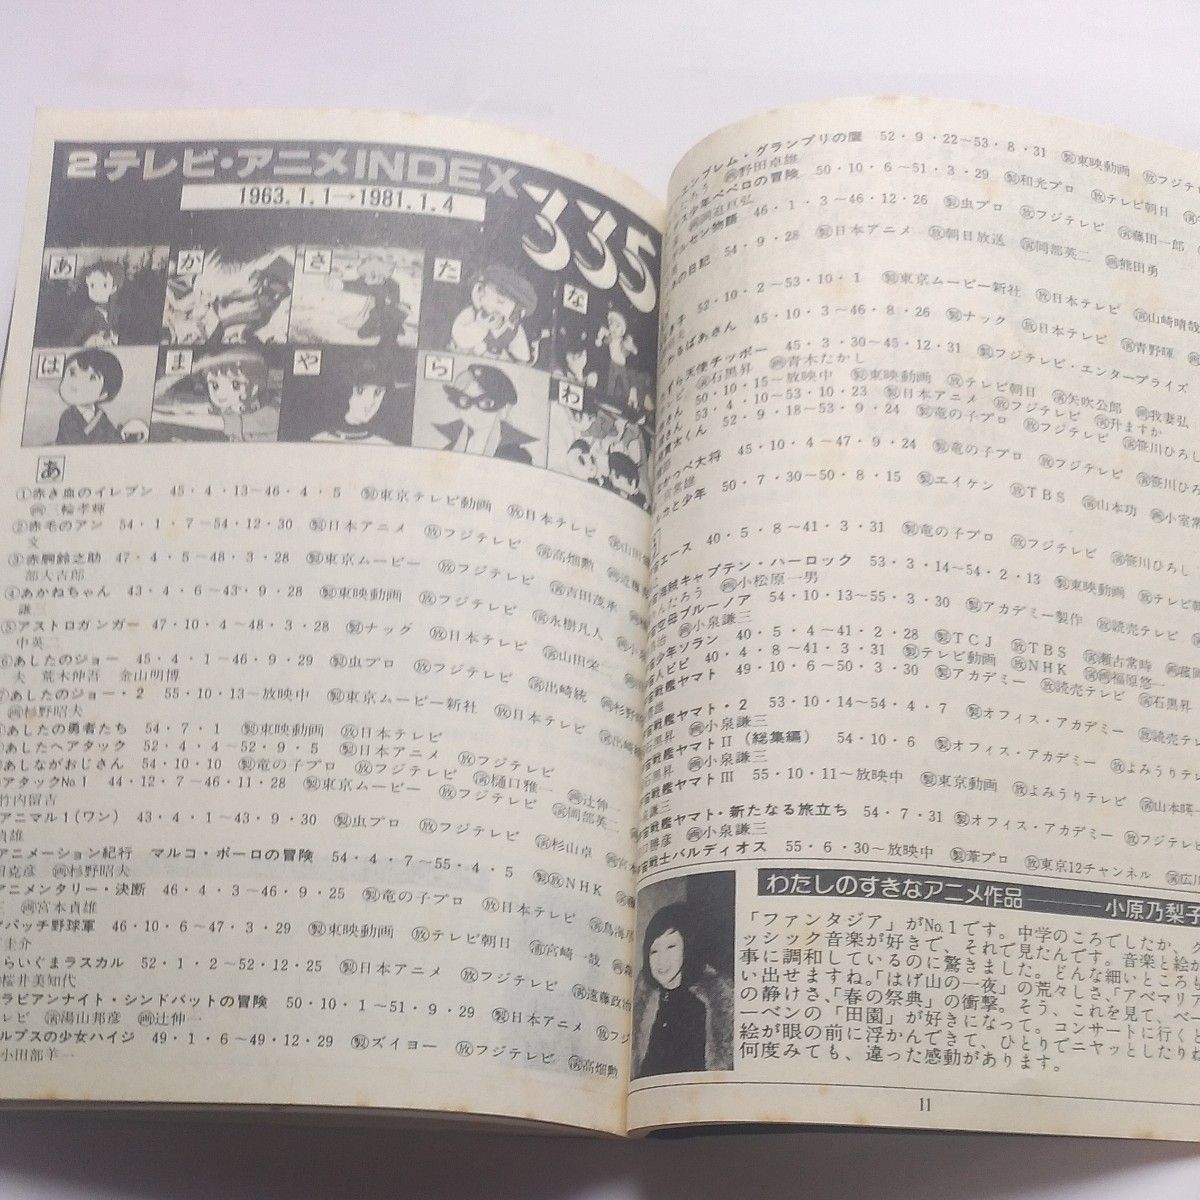 『Animage 1981NOTES  WITH ANIMATION PERFECT DATA 』アニメージュ’81･2月号 付録